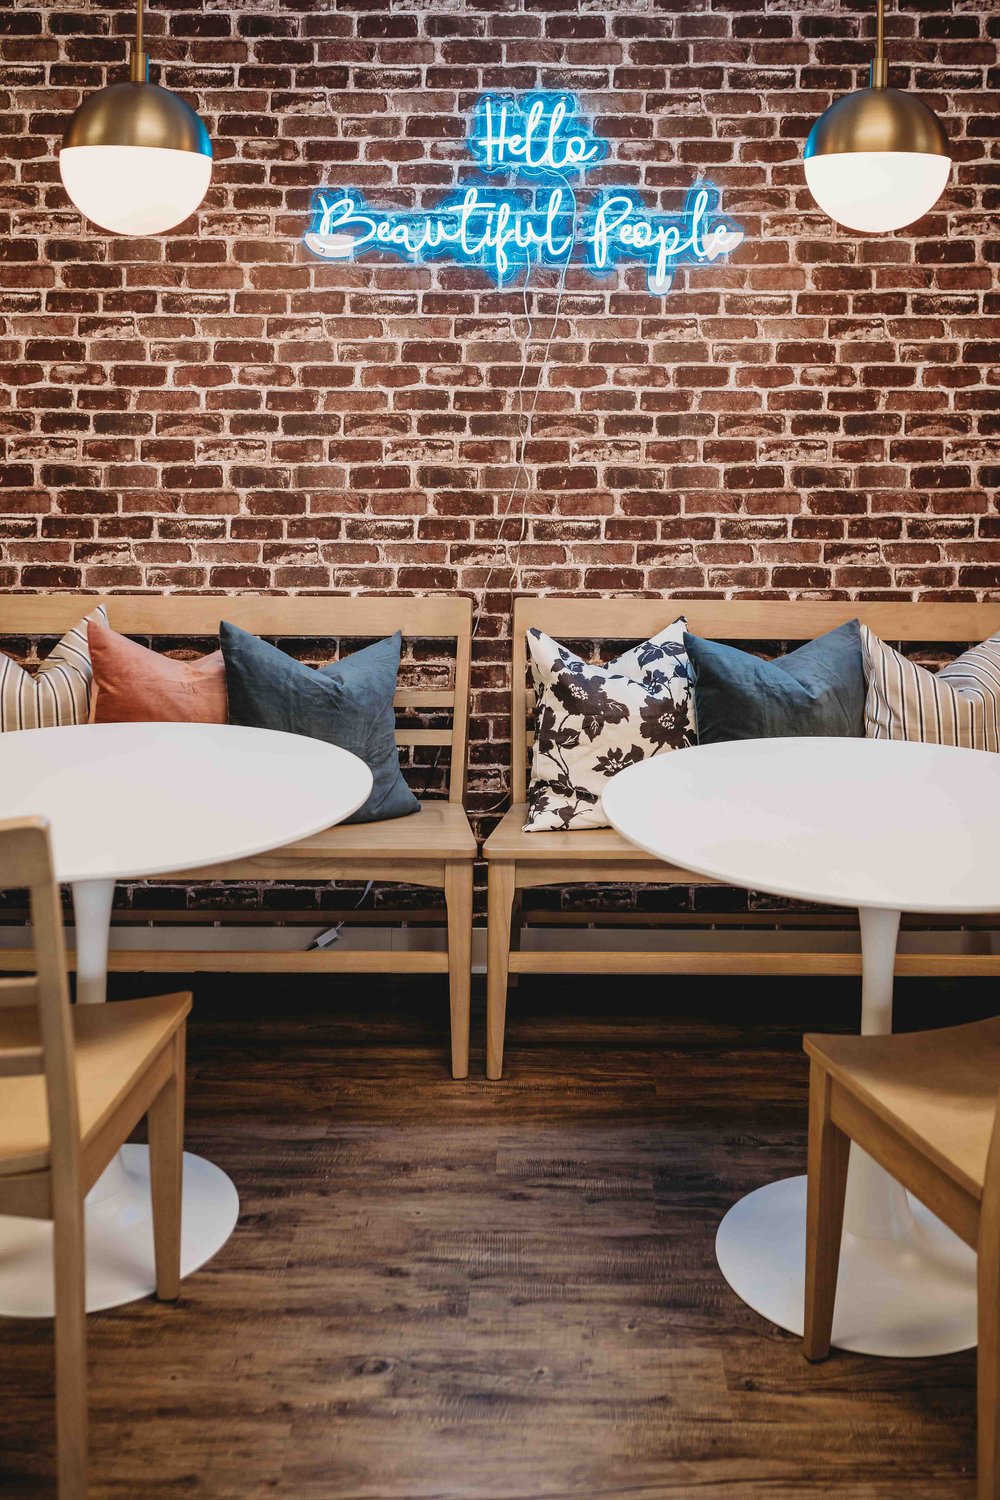 Cafe; a blue LED sign that says 'Hello Beautiful People' hang on a brick wall. There are two identical ceiling lights, round white tables, and wooden benches with pillows on them